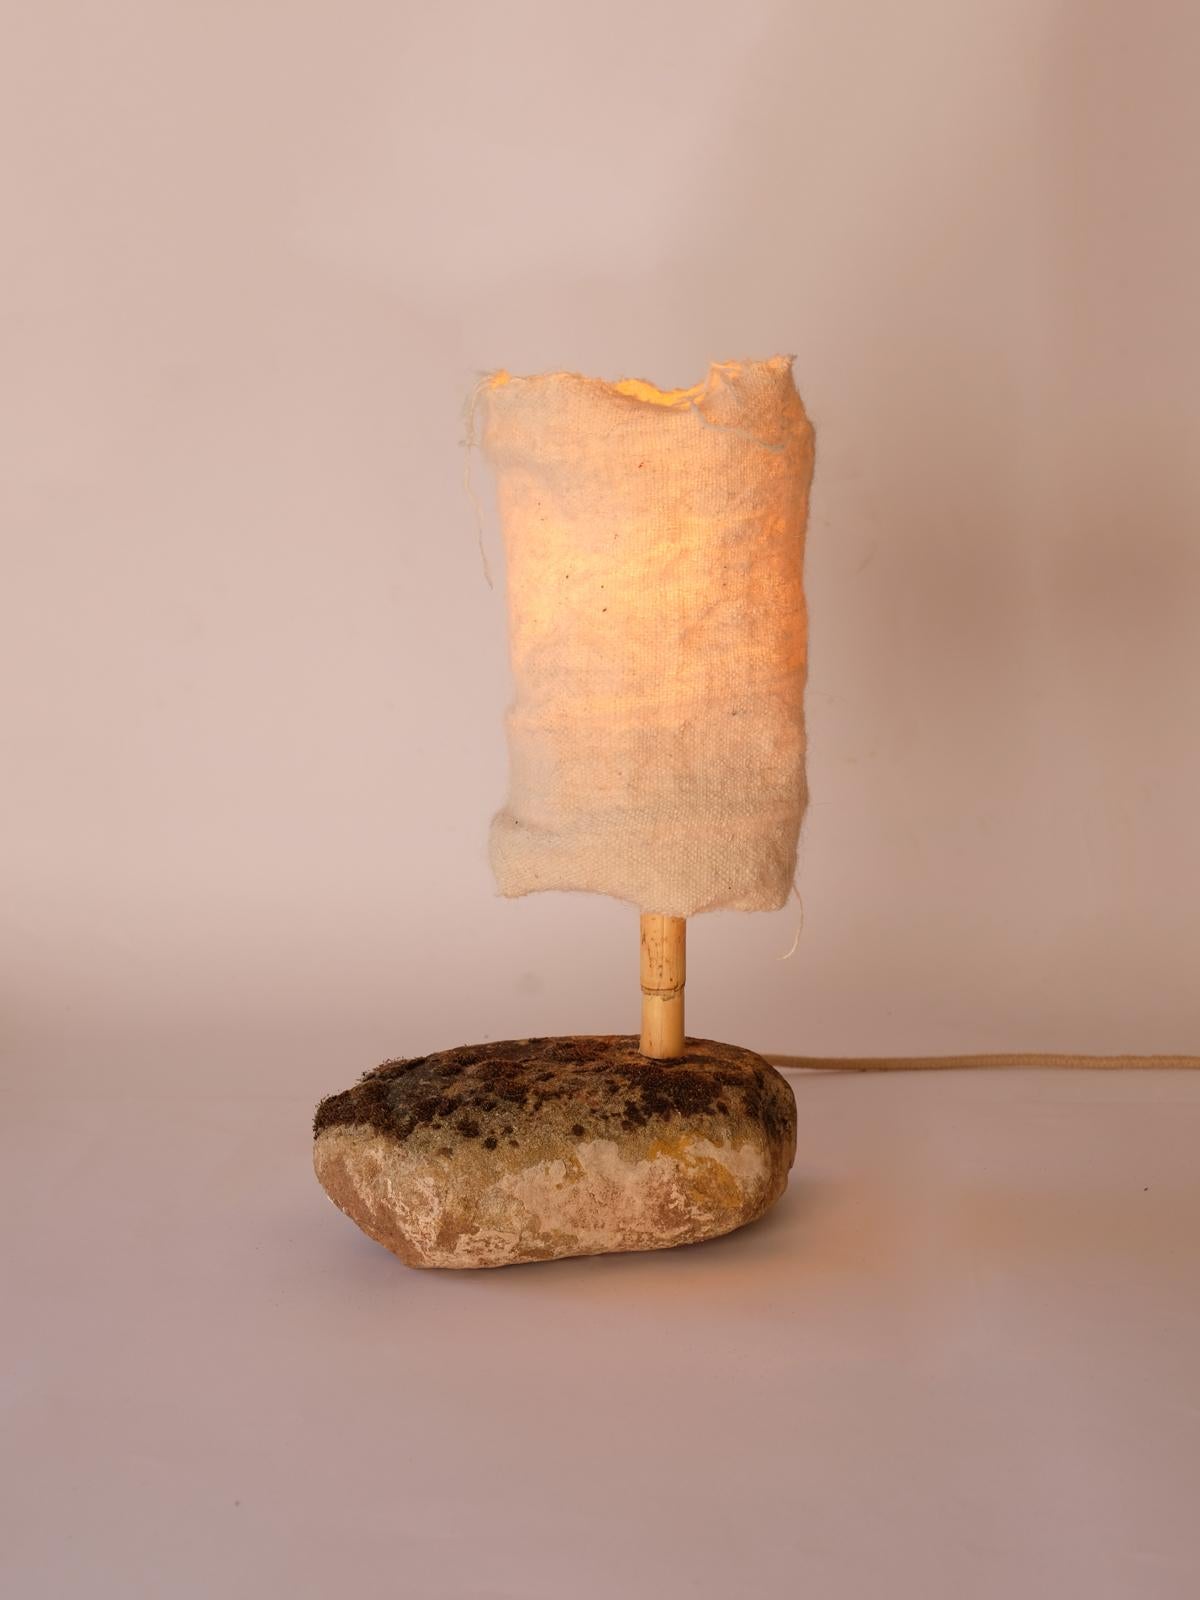 Contemporary Hjra Table Lamp Small, Handspun, Handwoven wool Lampshade, Made of Rock & Reed For Sale